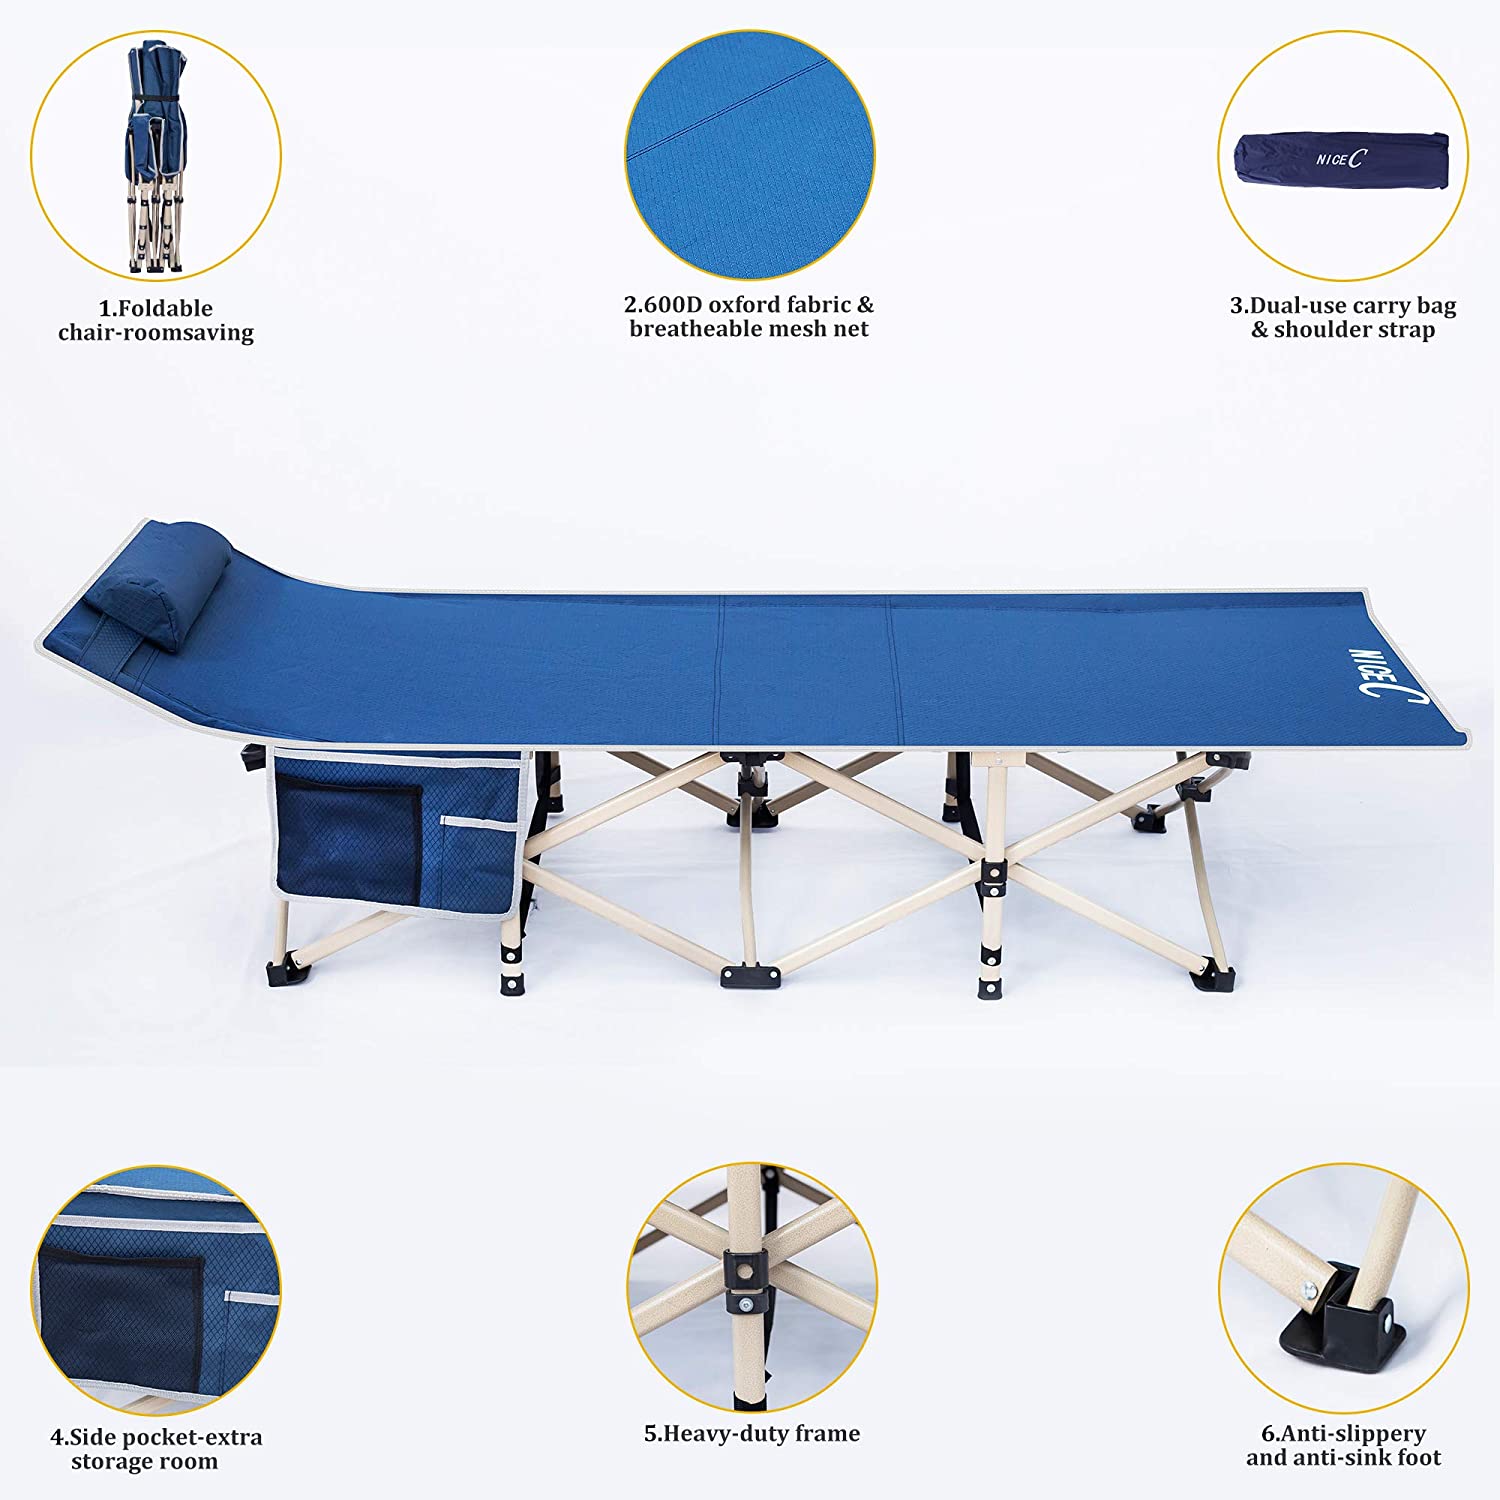 Nicec Folding Camping Cot, Sleeping Bed, Tent Cot, with Pillow, Carry Bag  Storage  Bag, Extra Wide Sturdy, Heavy Duty Holds Up to 500 Lbs, Lightweight,  Comfortable for OutdoorIndoor (Dark Blue)